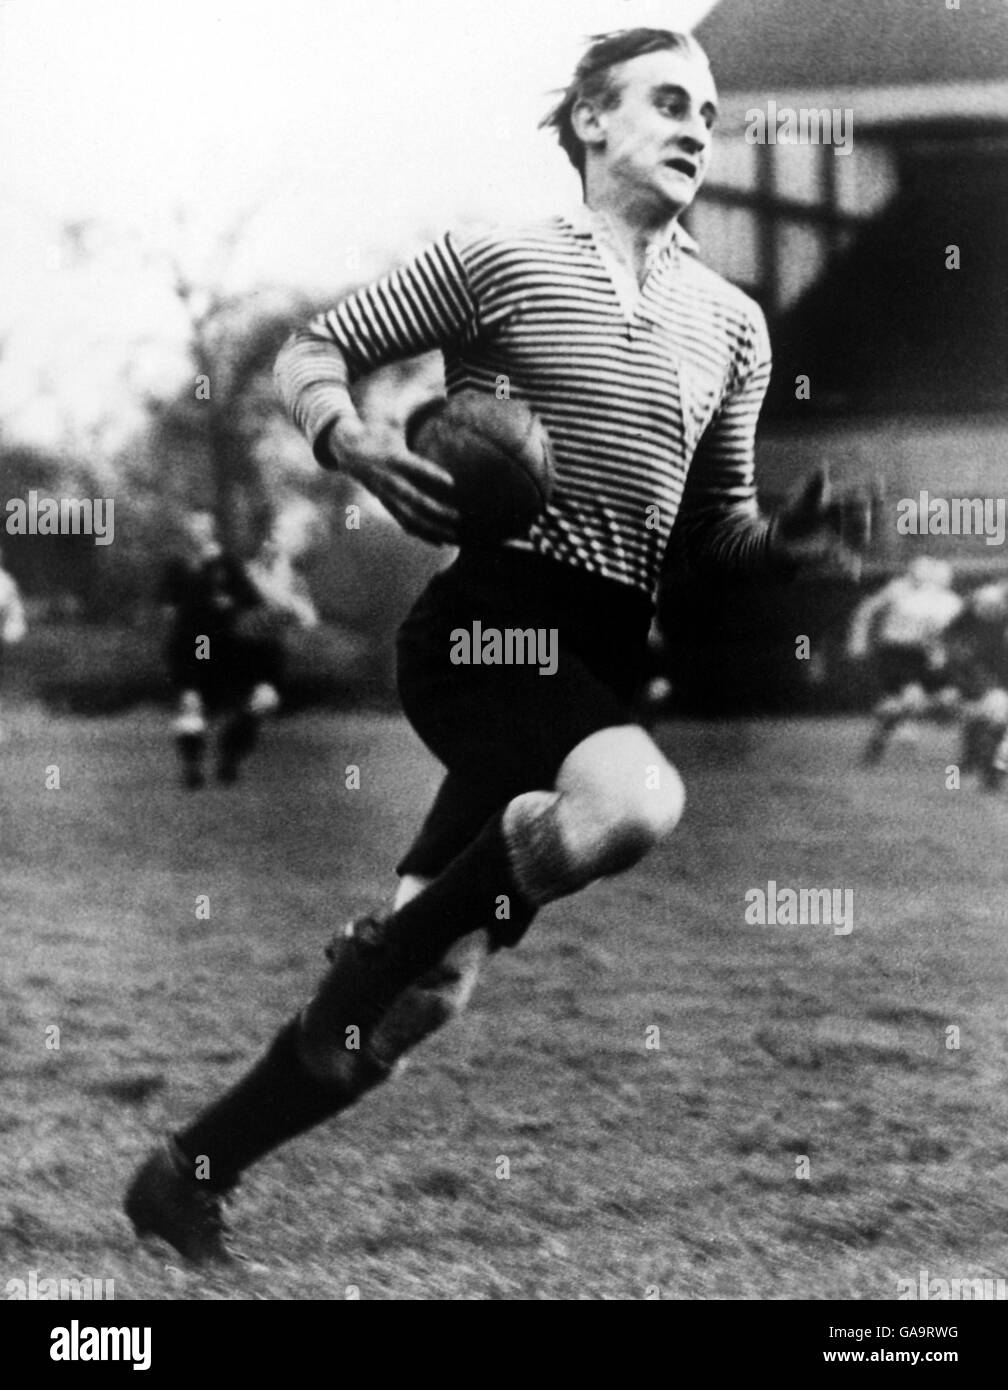 Rugby Union. Prince Alexander Obolensky in action Stock Photo